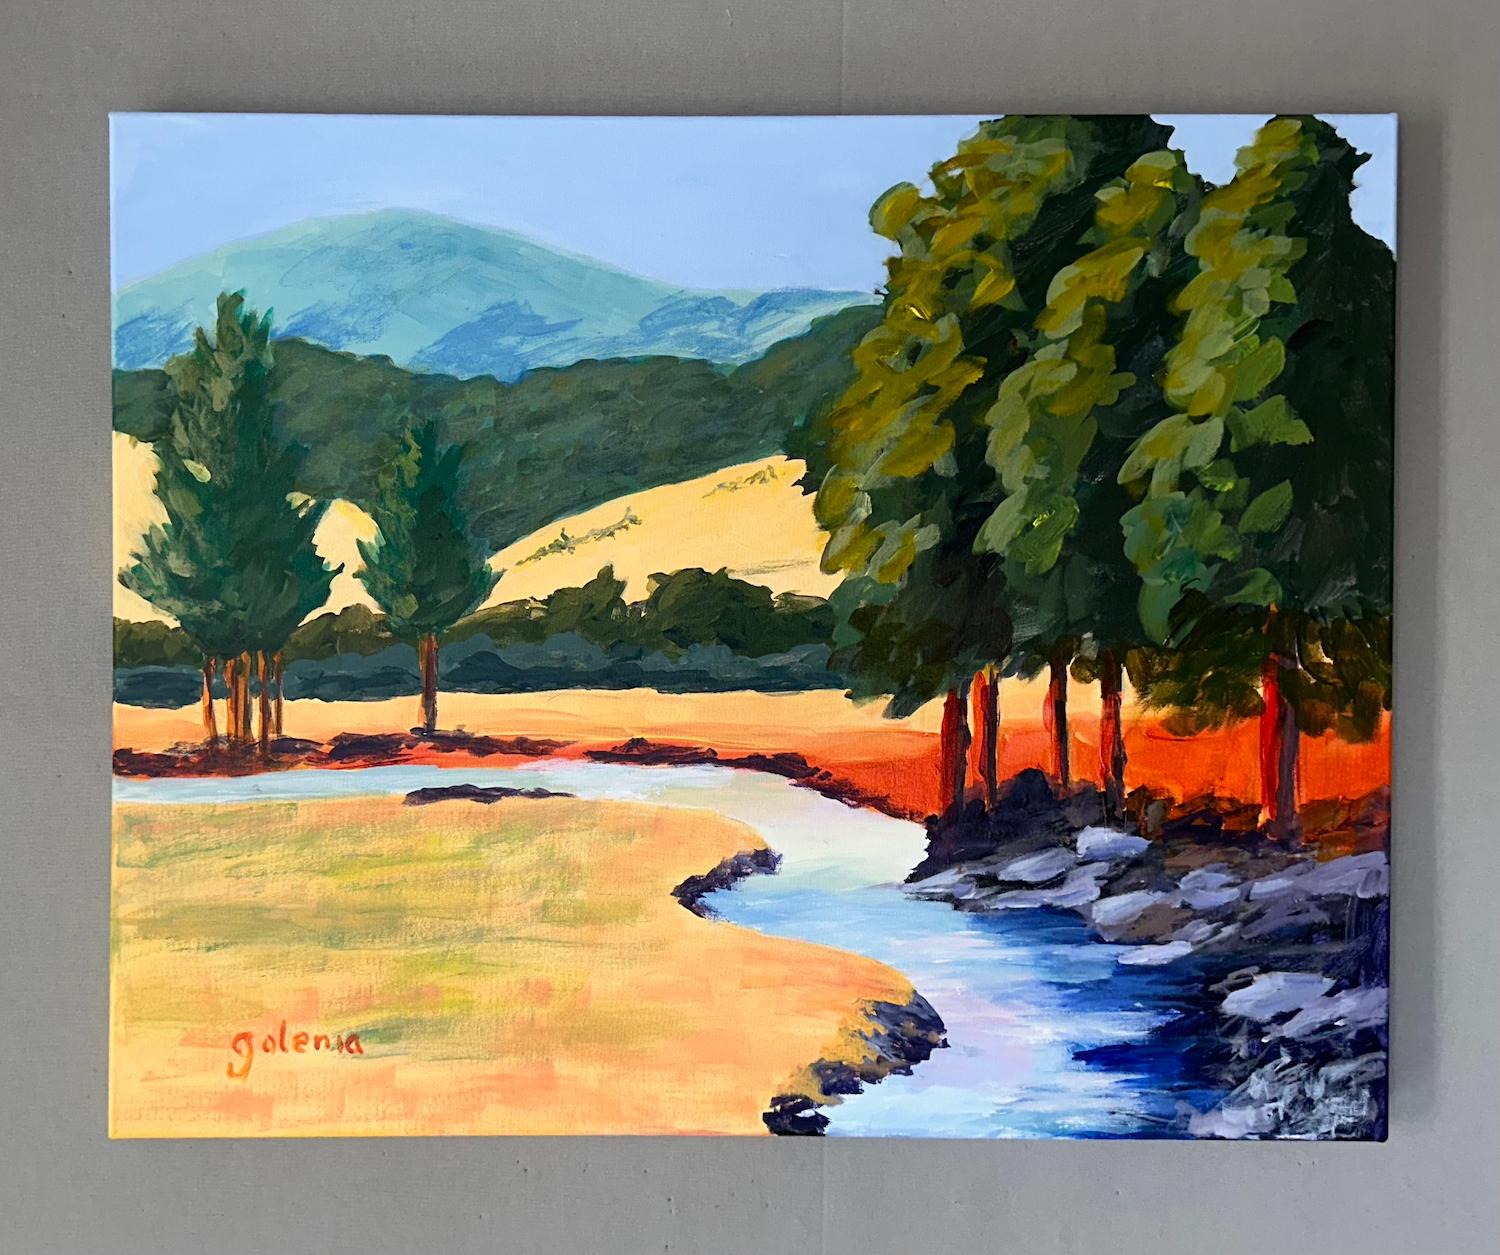 <p>Artist Comments<br />Early fall brings forth golden grasses, with distant mountains providing a cool backdrop. The rushing stream curves through the sunlight and shade, creating a sense of movement within the composition. Bold brushstrokes and